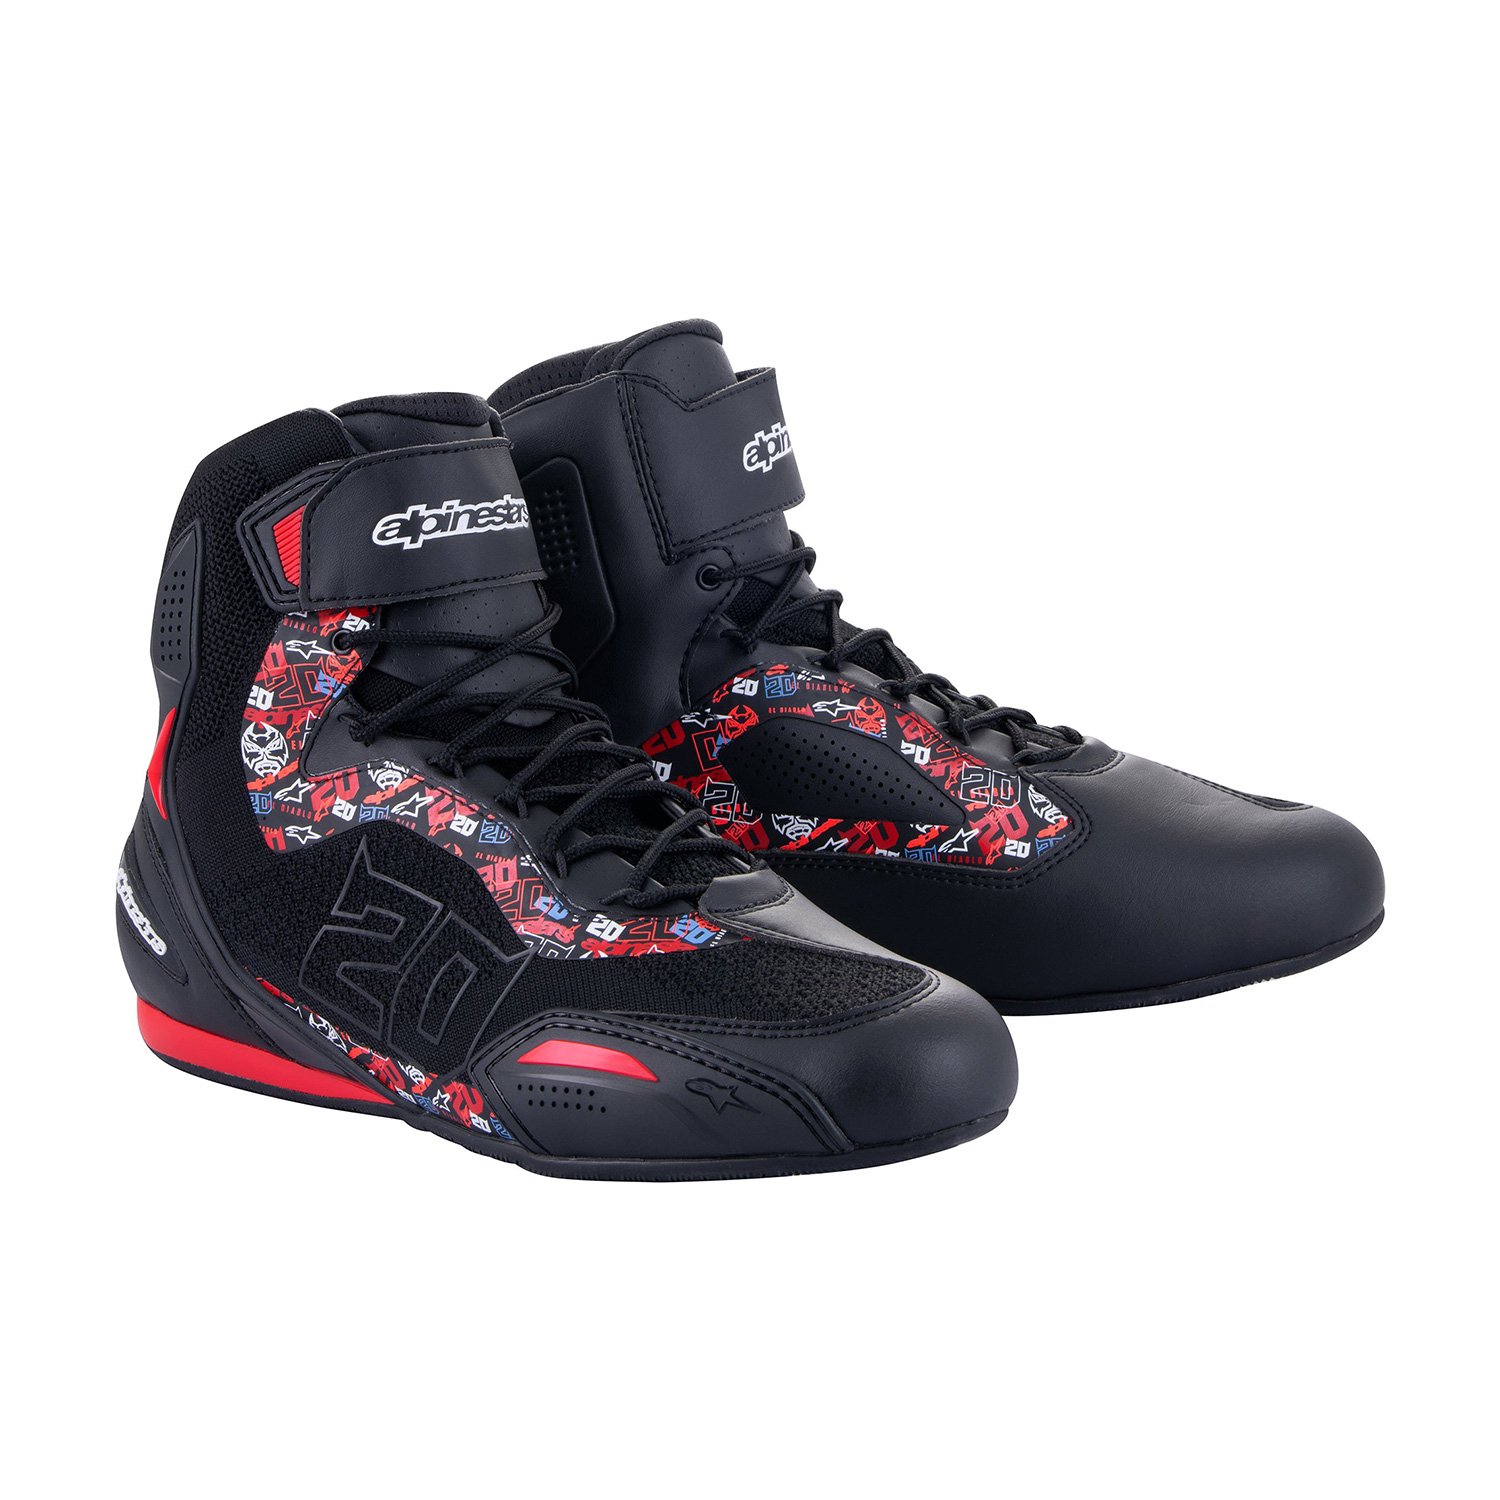 Image of EU Alpinestars FQ20 Faster-3 Rideknit Noir Bright Rouge Chaussures Taille US 8